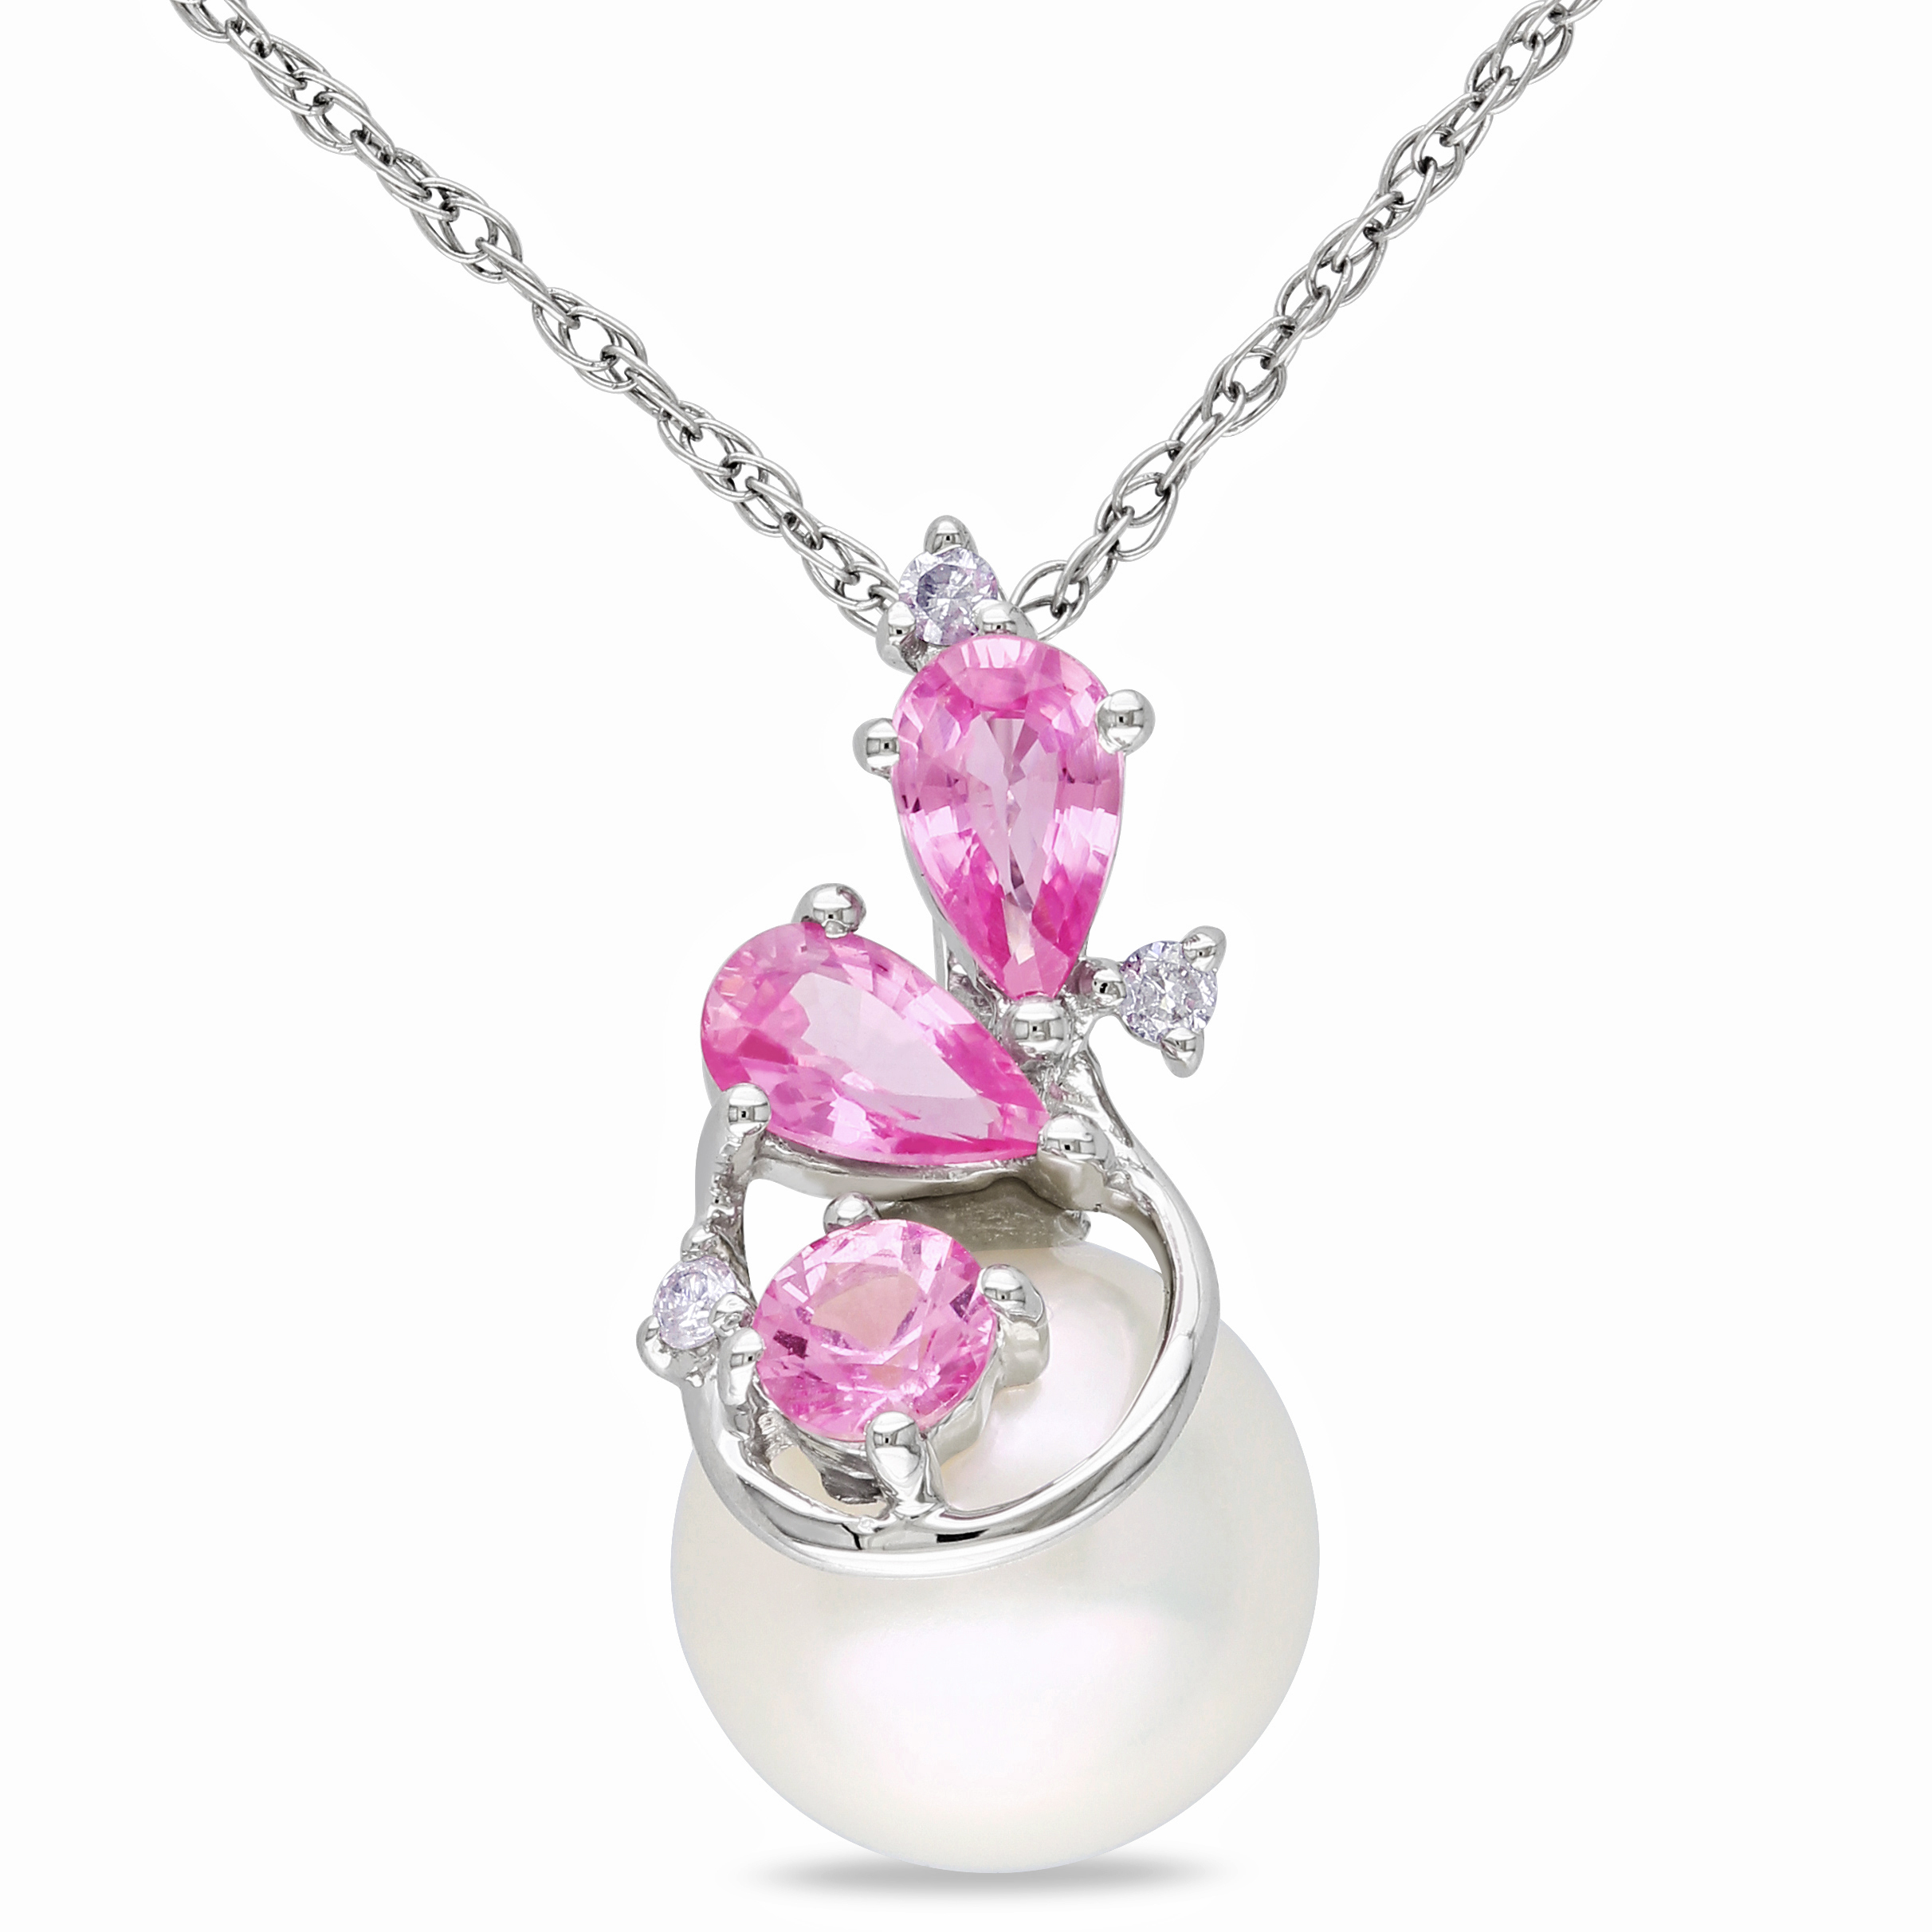 8.5 - 9 MM Cultured Freshwater Pearl, Diamond and Sapphire Cluster Pendant with Chain in 10k White Gold